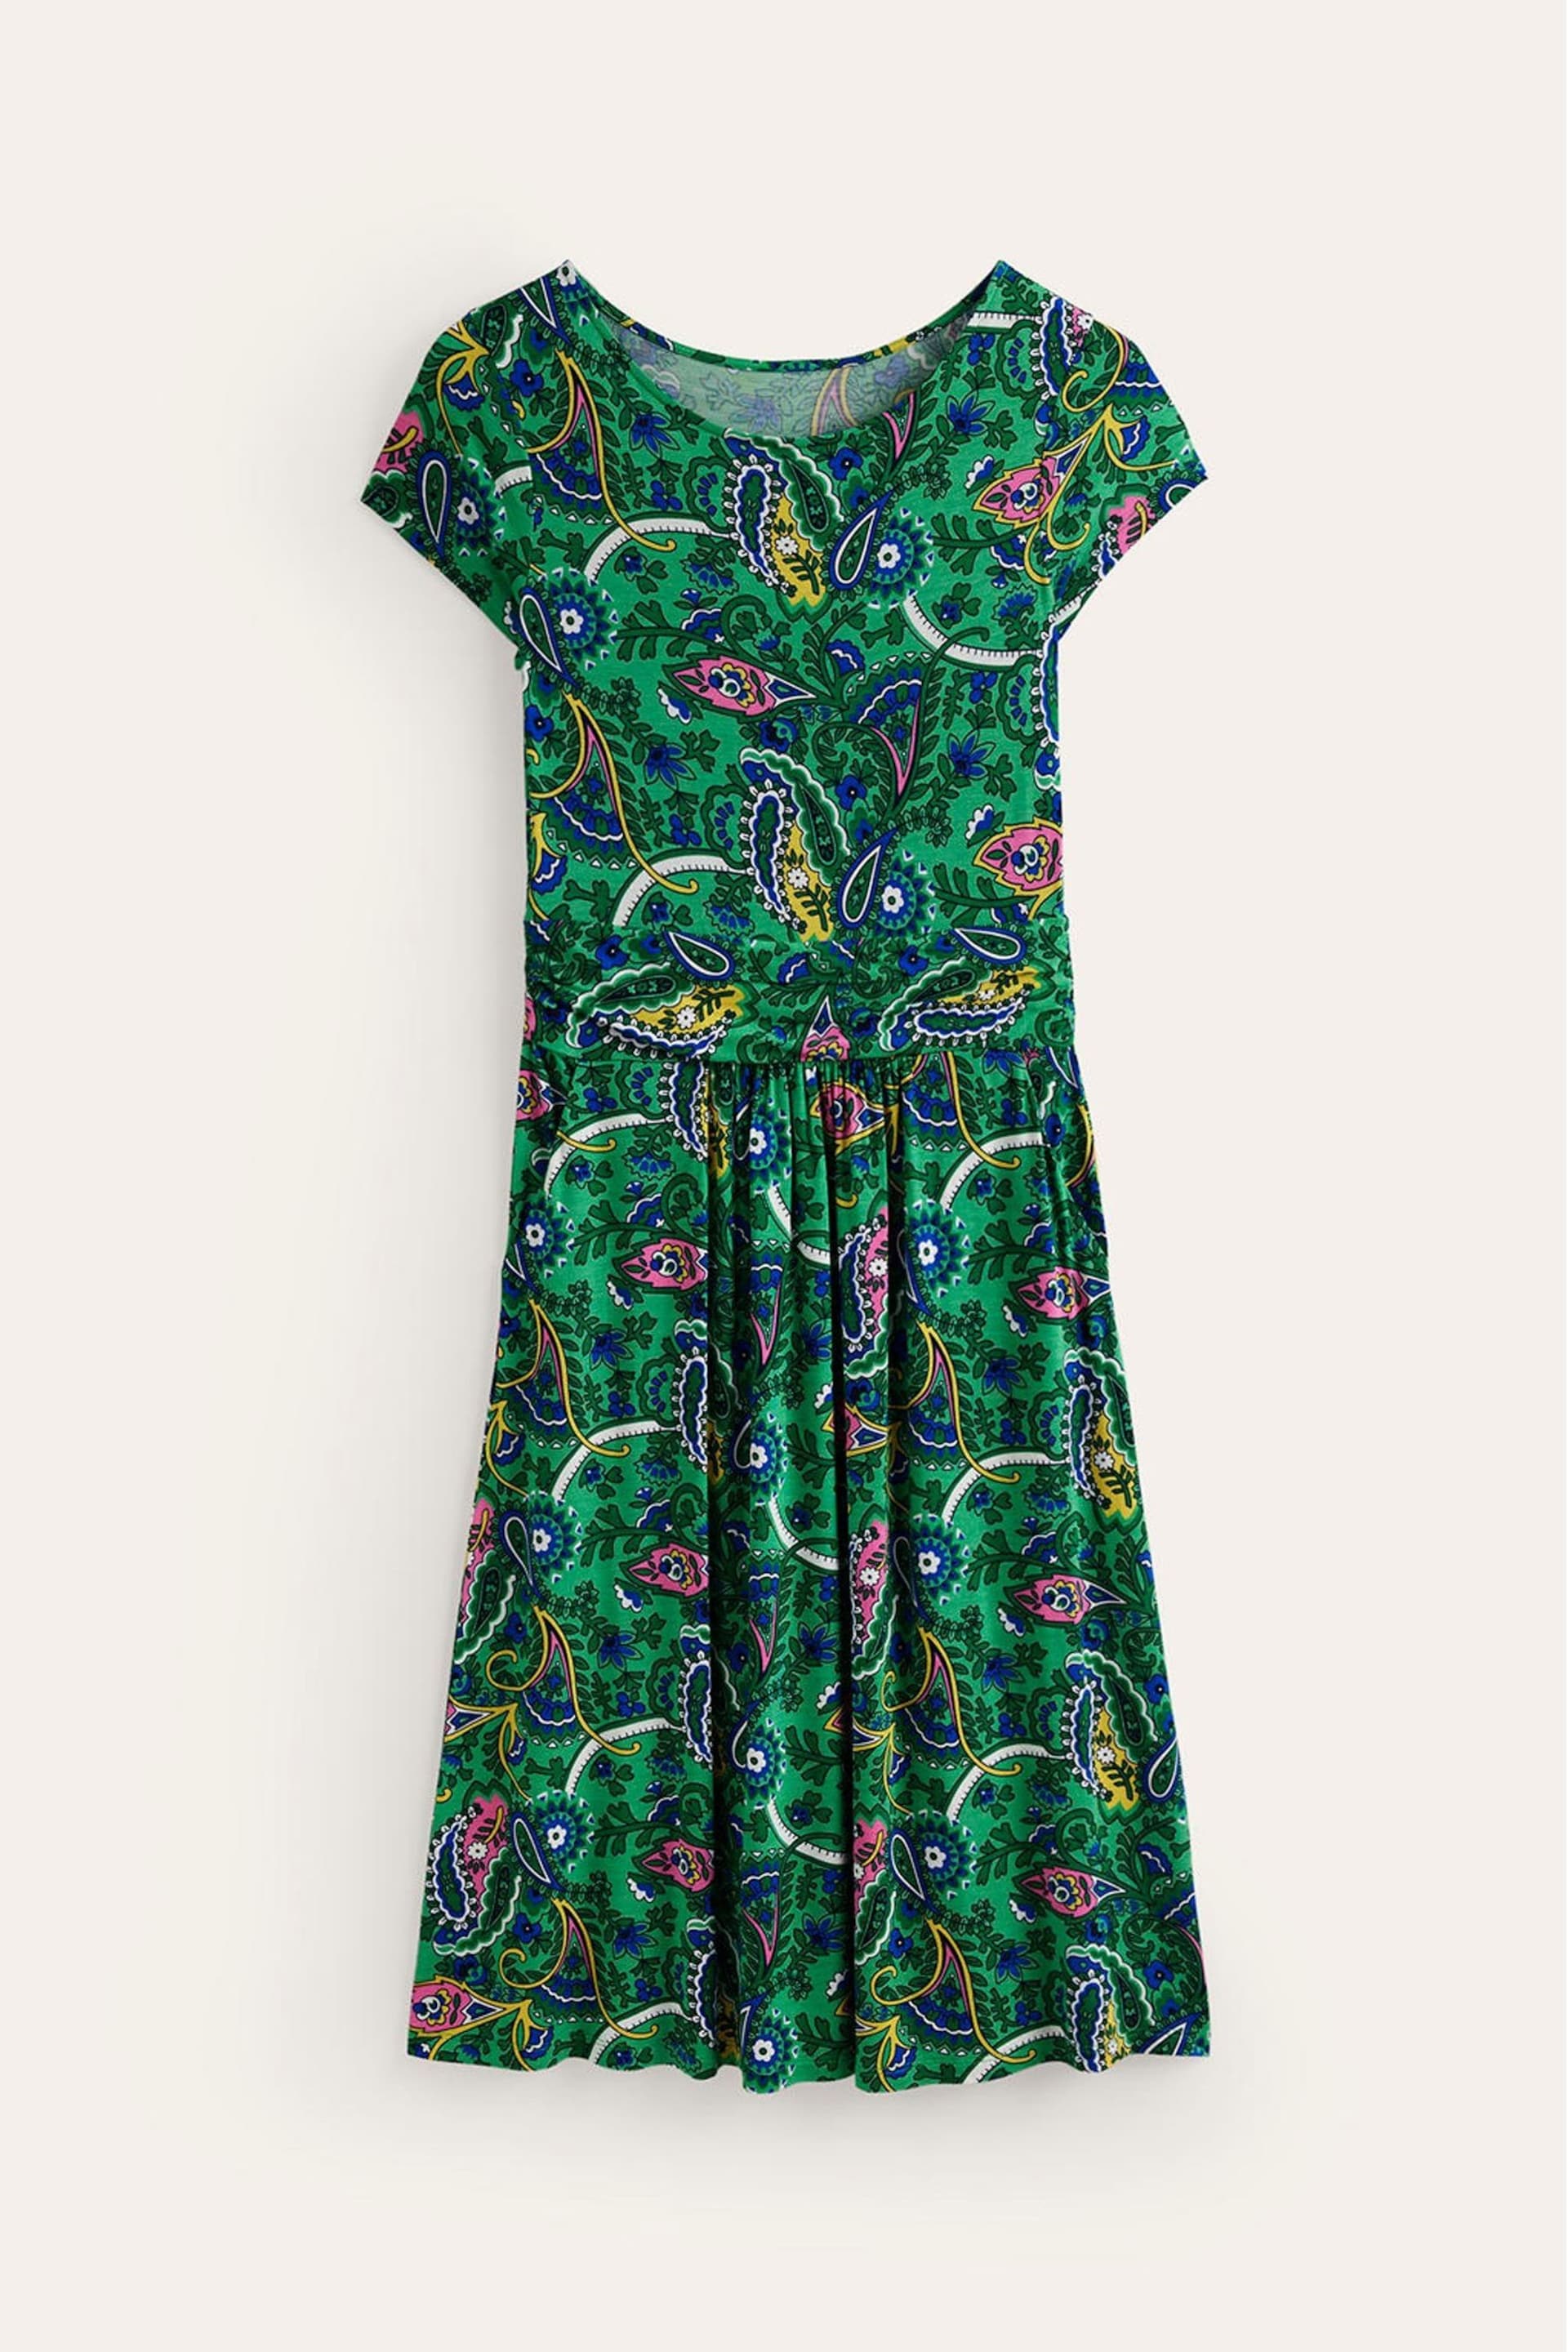 Boden Green Amelie Jersey Dress - Image 5 of 5